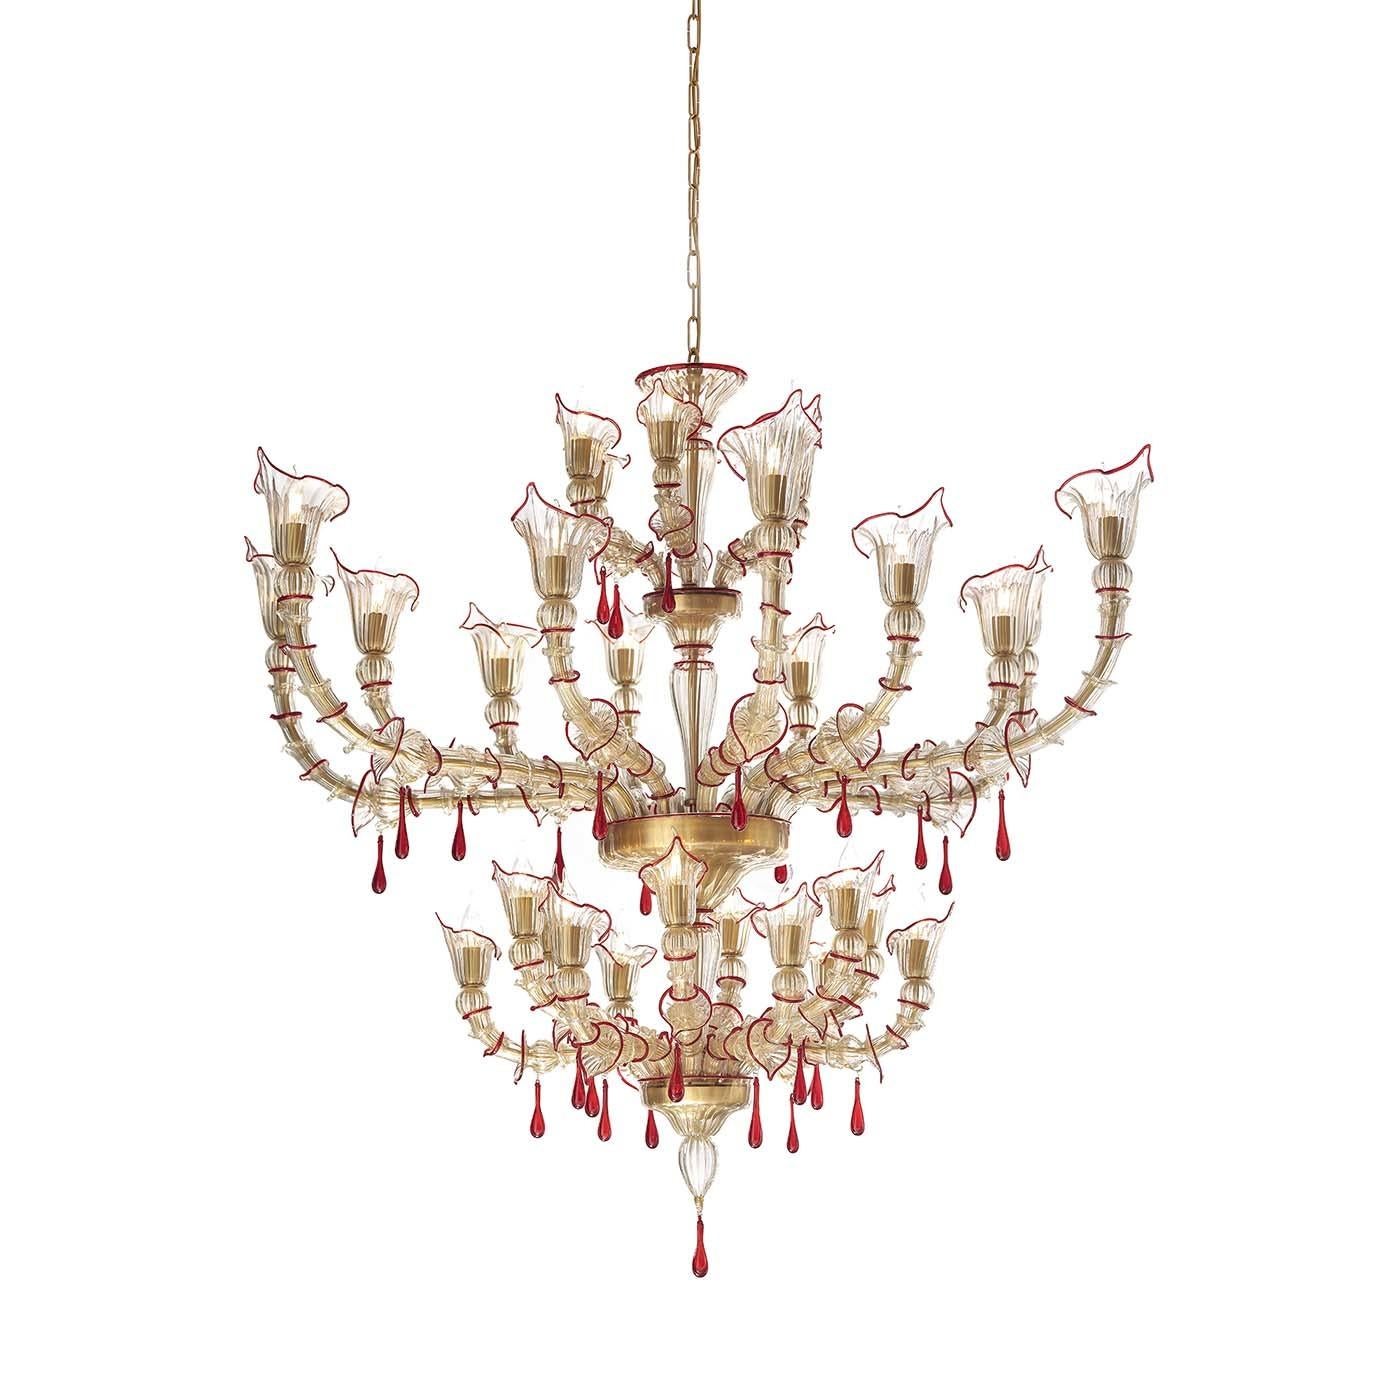 Build on three tiers, this Murano glass chandelier is the epitome of grace and refinement. Decorated from bottom to top with gold and red decorations, the imposing yet light structure is handcrafted in the Ca' Rezzonico style, illuminated by thirty